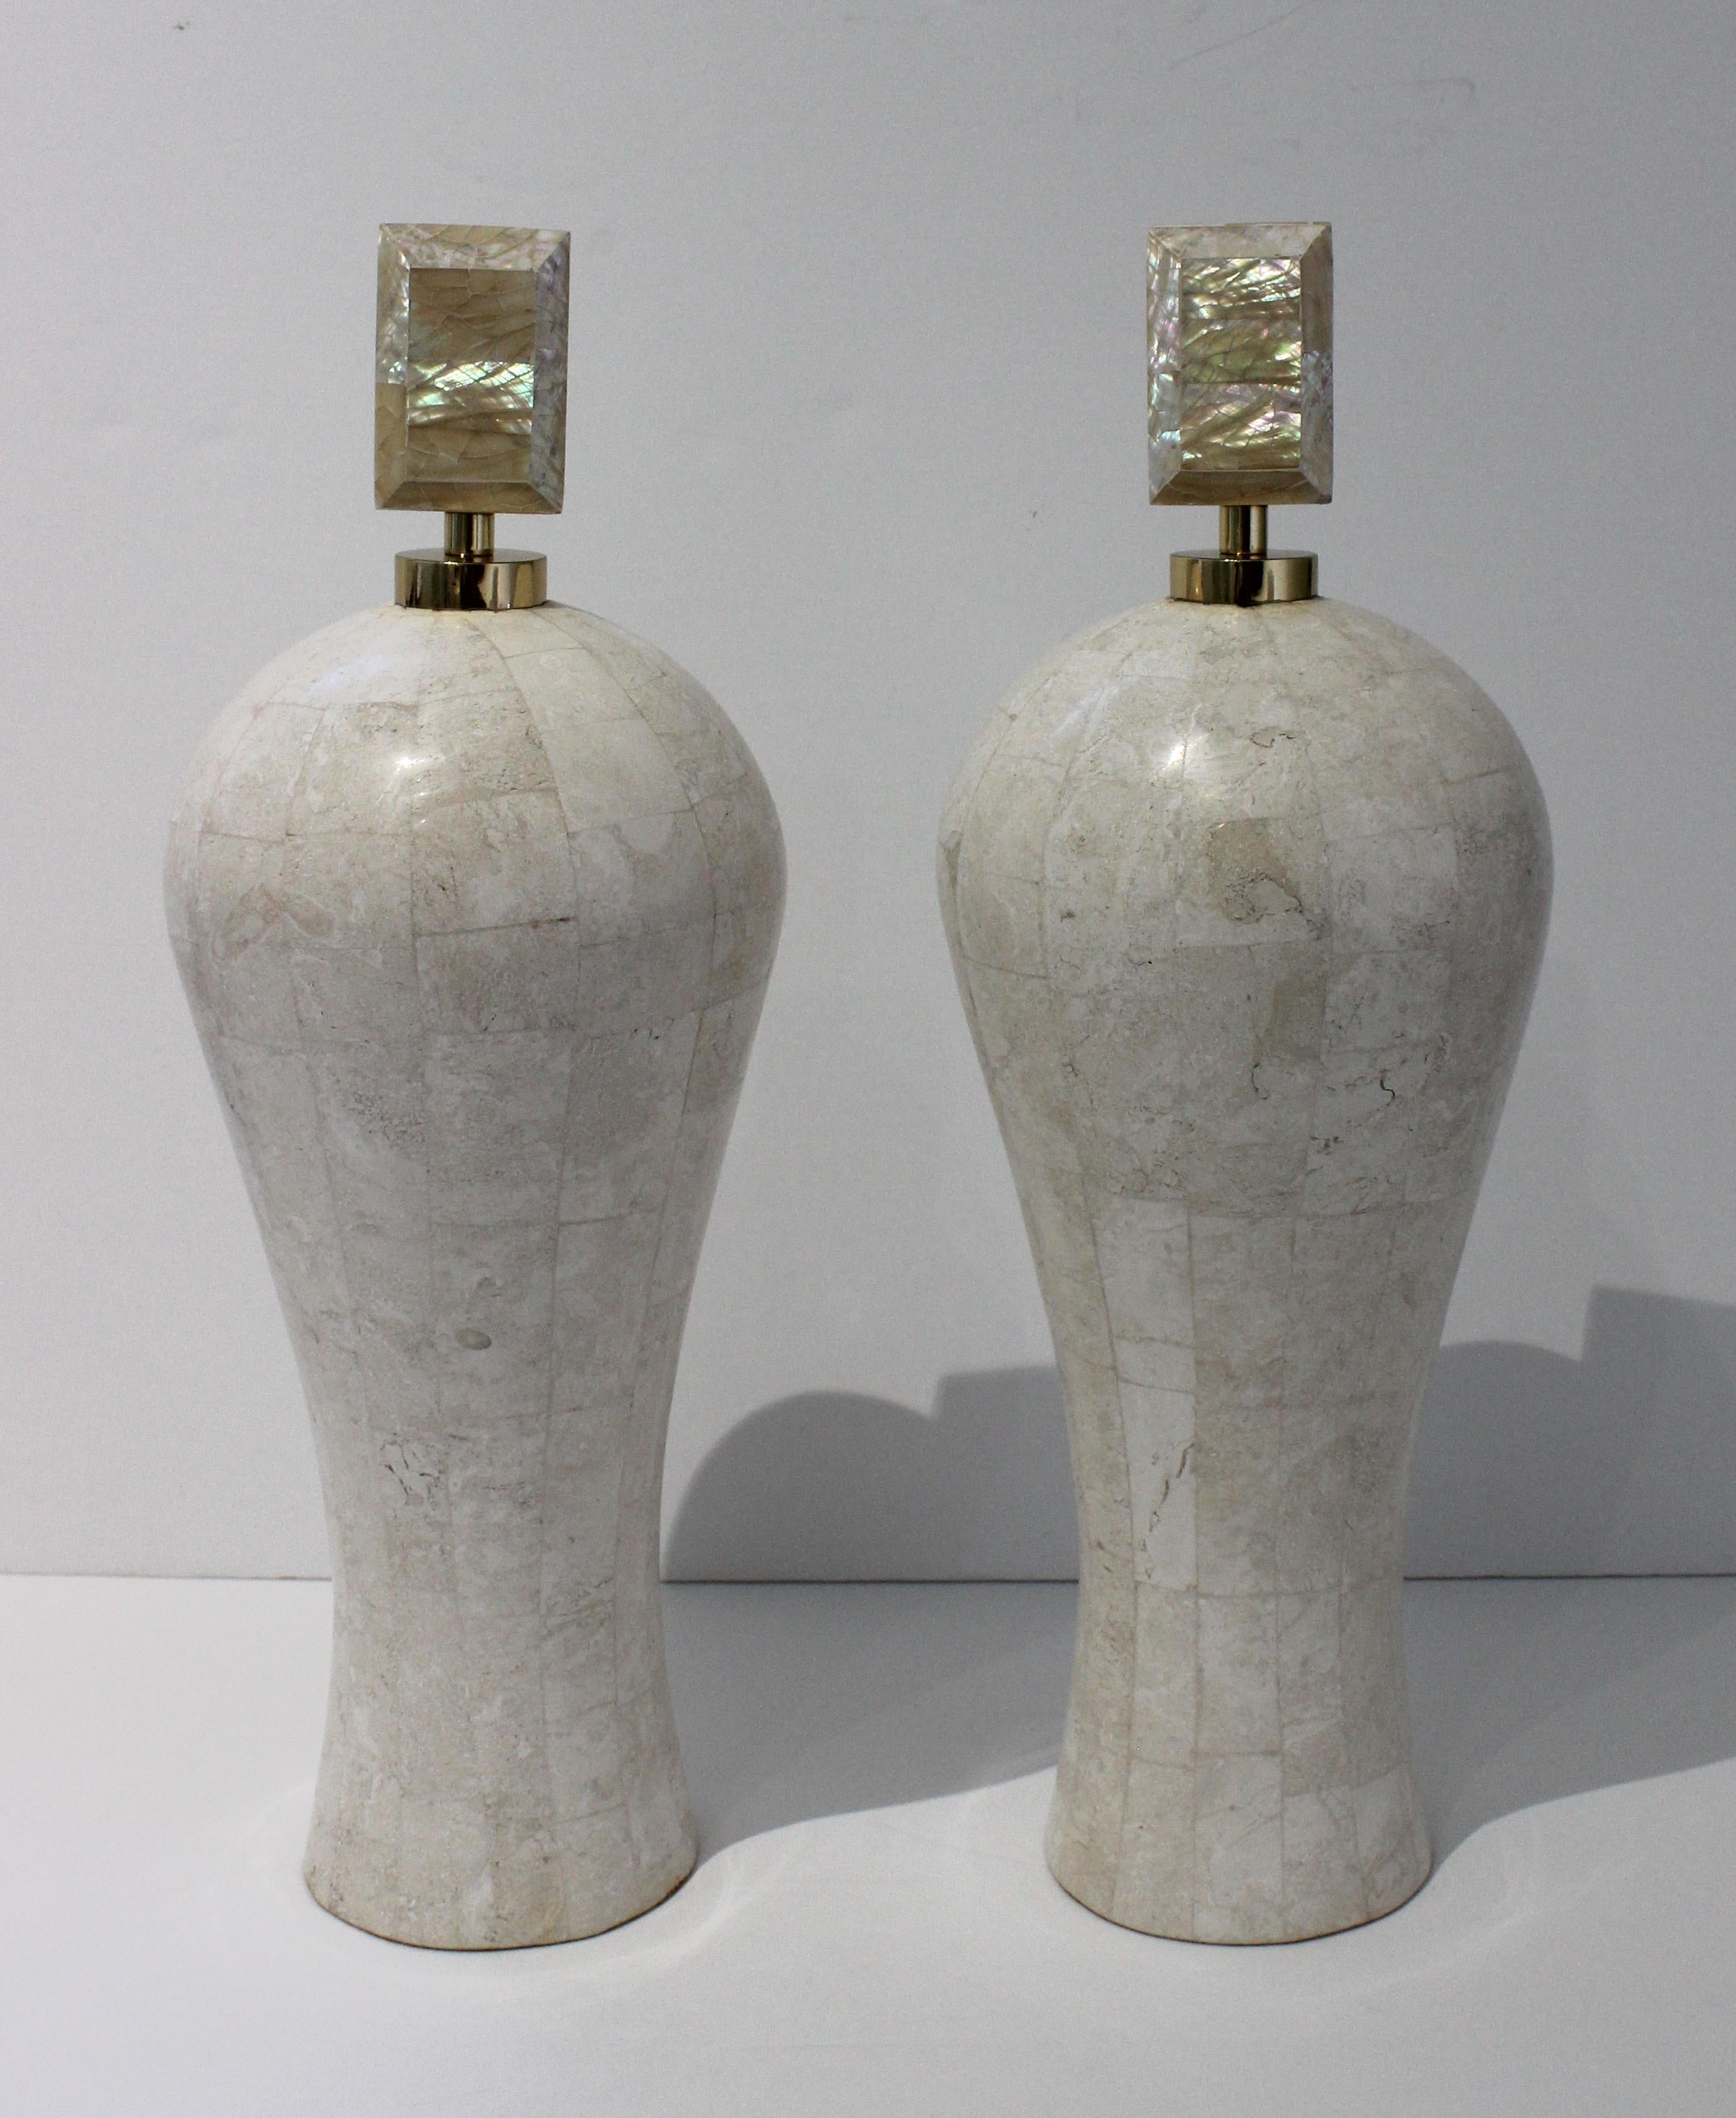 Stylish decorative marble vases with mother-of-pearl and brass stoppers. Vintage Maitland-Smith Garniture Vases in Tessellated Marble Mother-of-Pearl and brass - a Pair - from a Palm Beach estate.

As hand-fashioned items, they have slightly